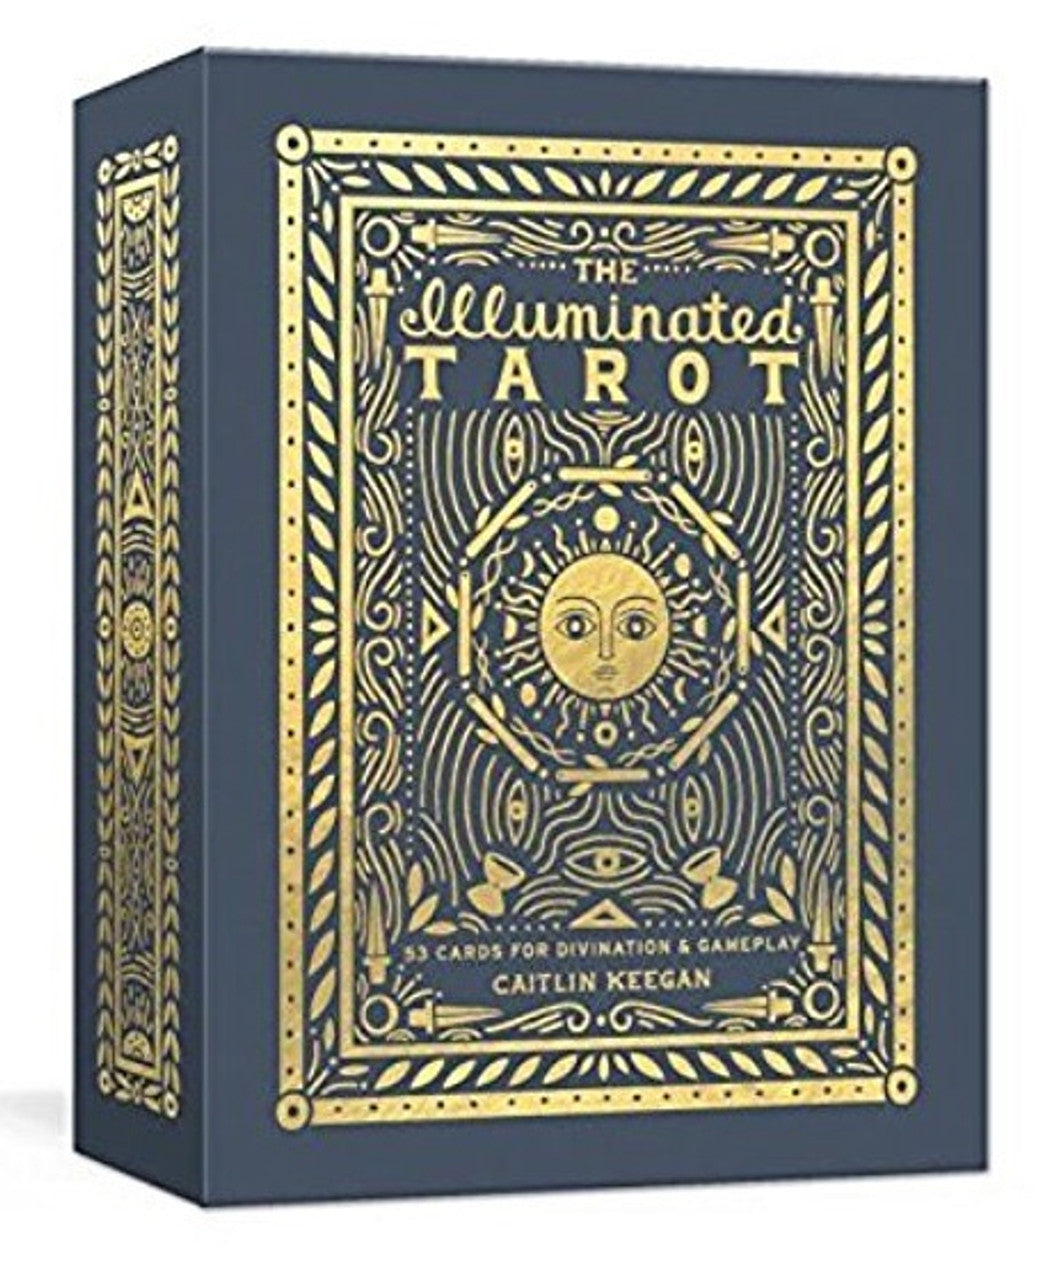 The Illuminated Tarot - 53 Cards for Divination & Gameplay by Caitlin Keegan